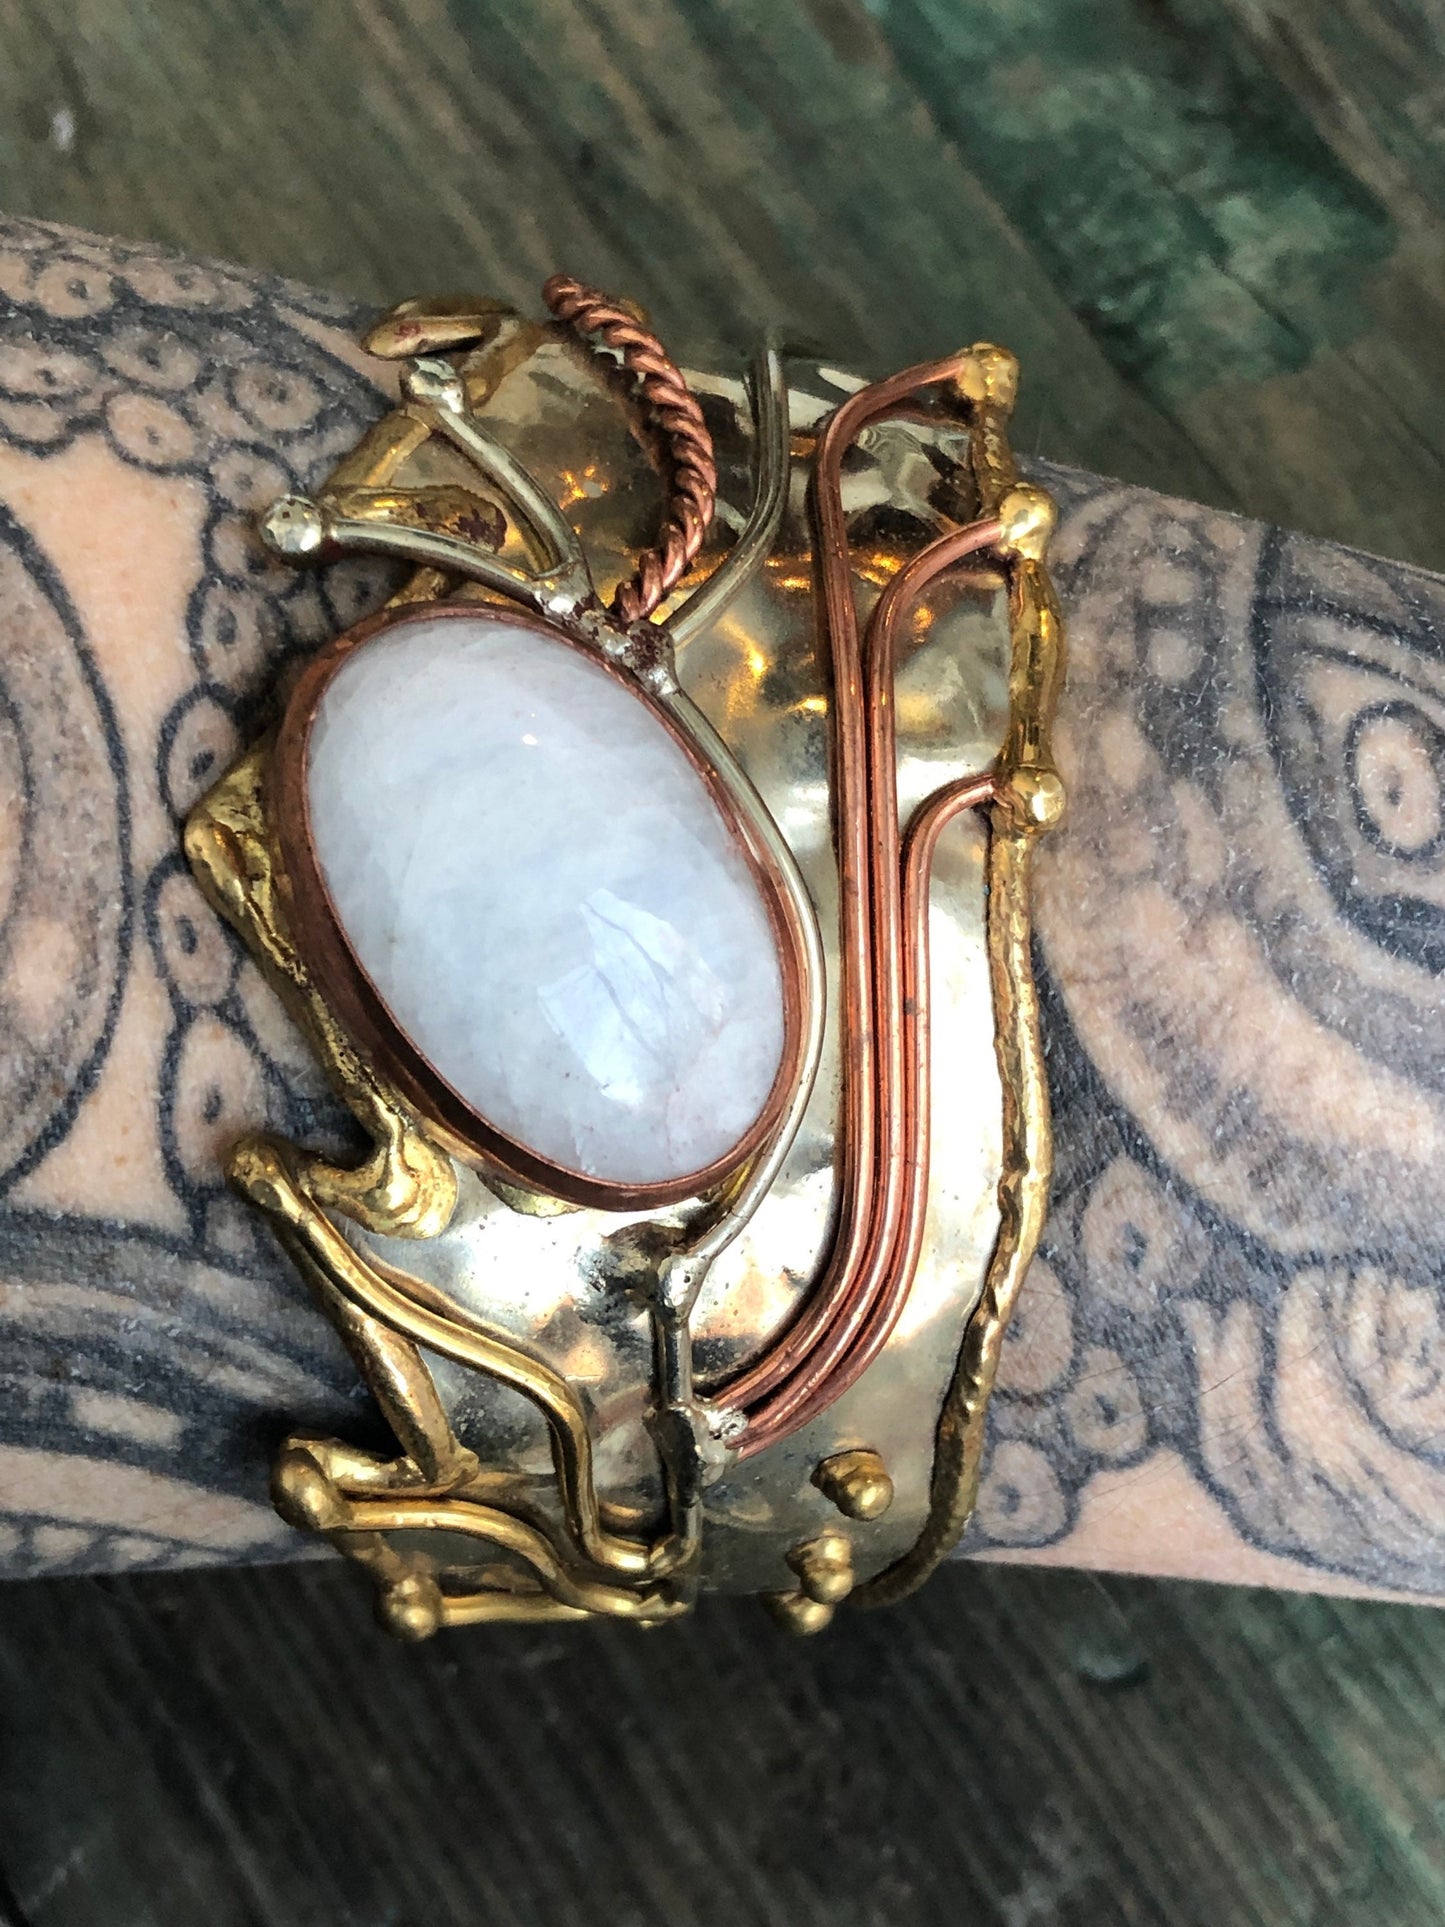 Rainbow Moonstone Cabochon Mixed Metal, Chunky, Barbaric, Arts & Crafts Silver, Copper and Brass Cuff Bracelet